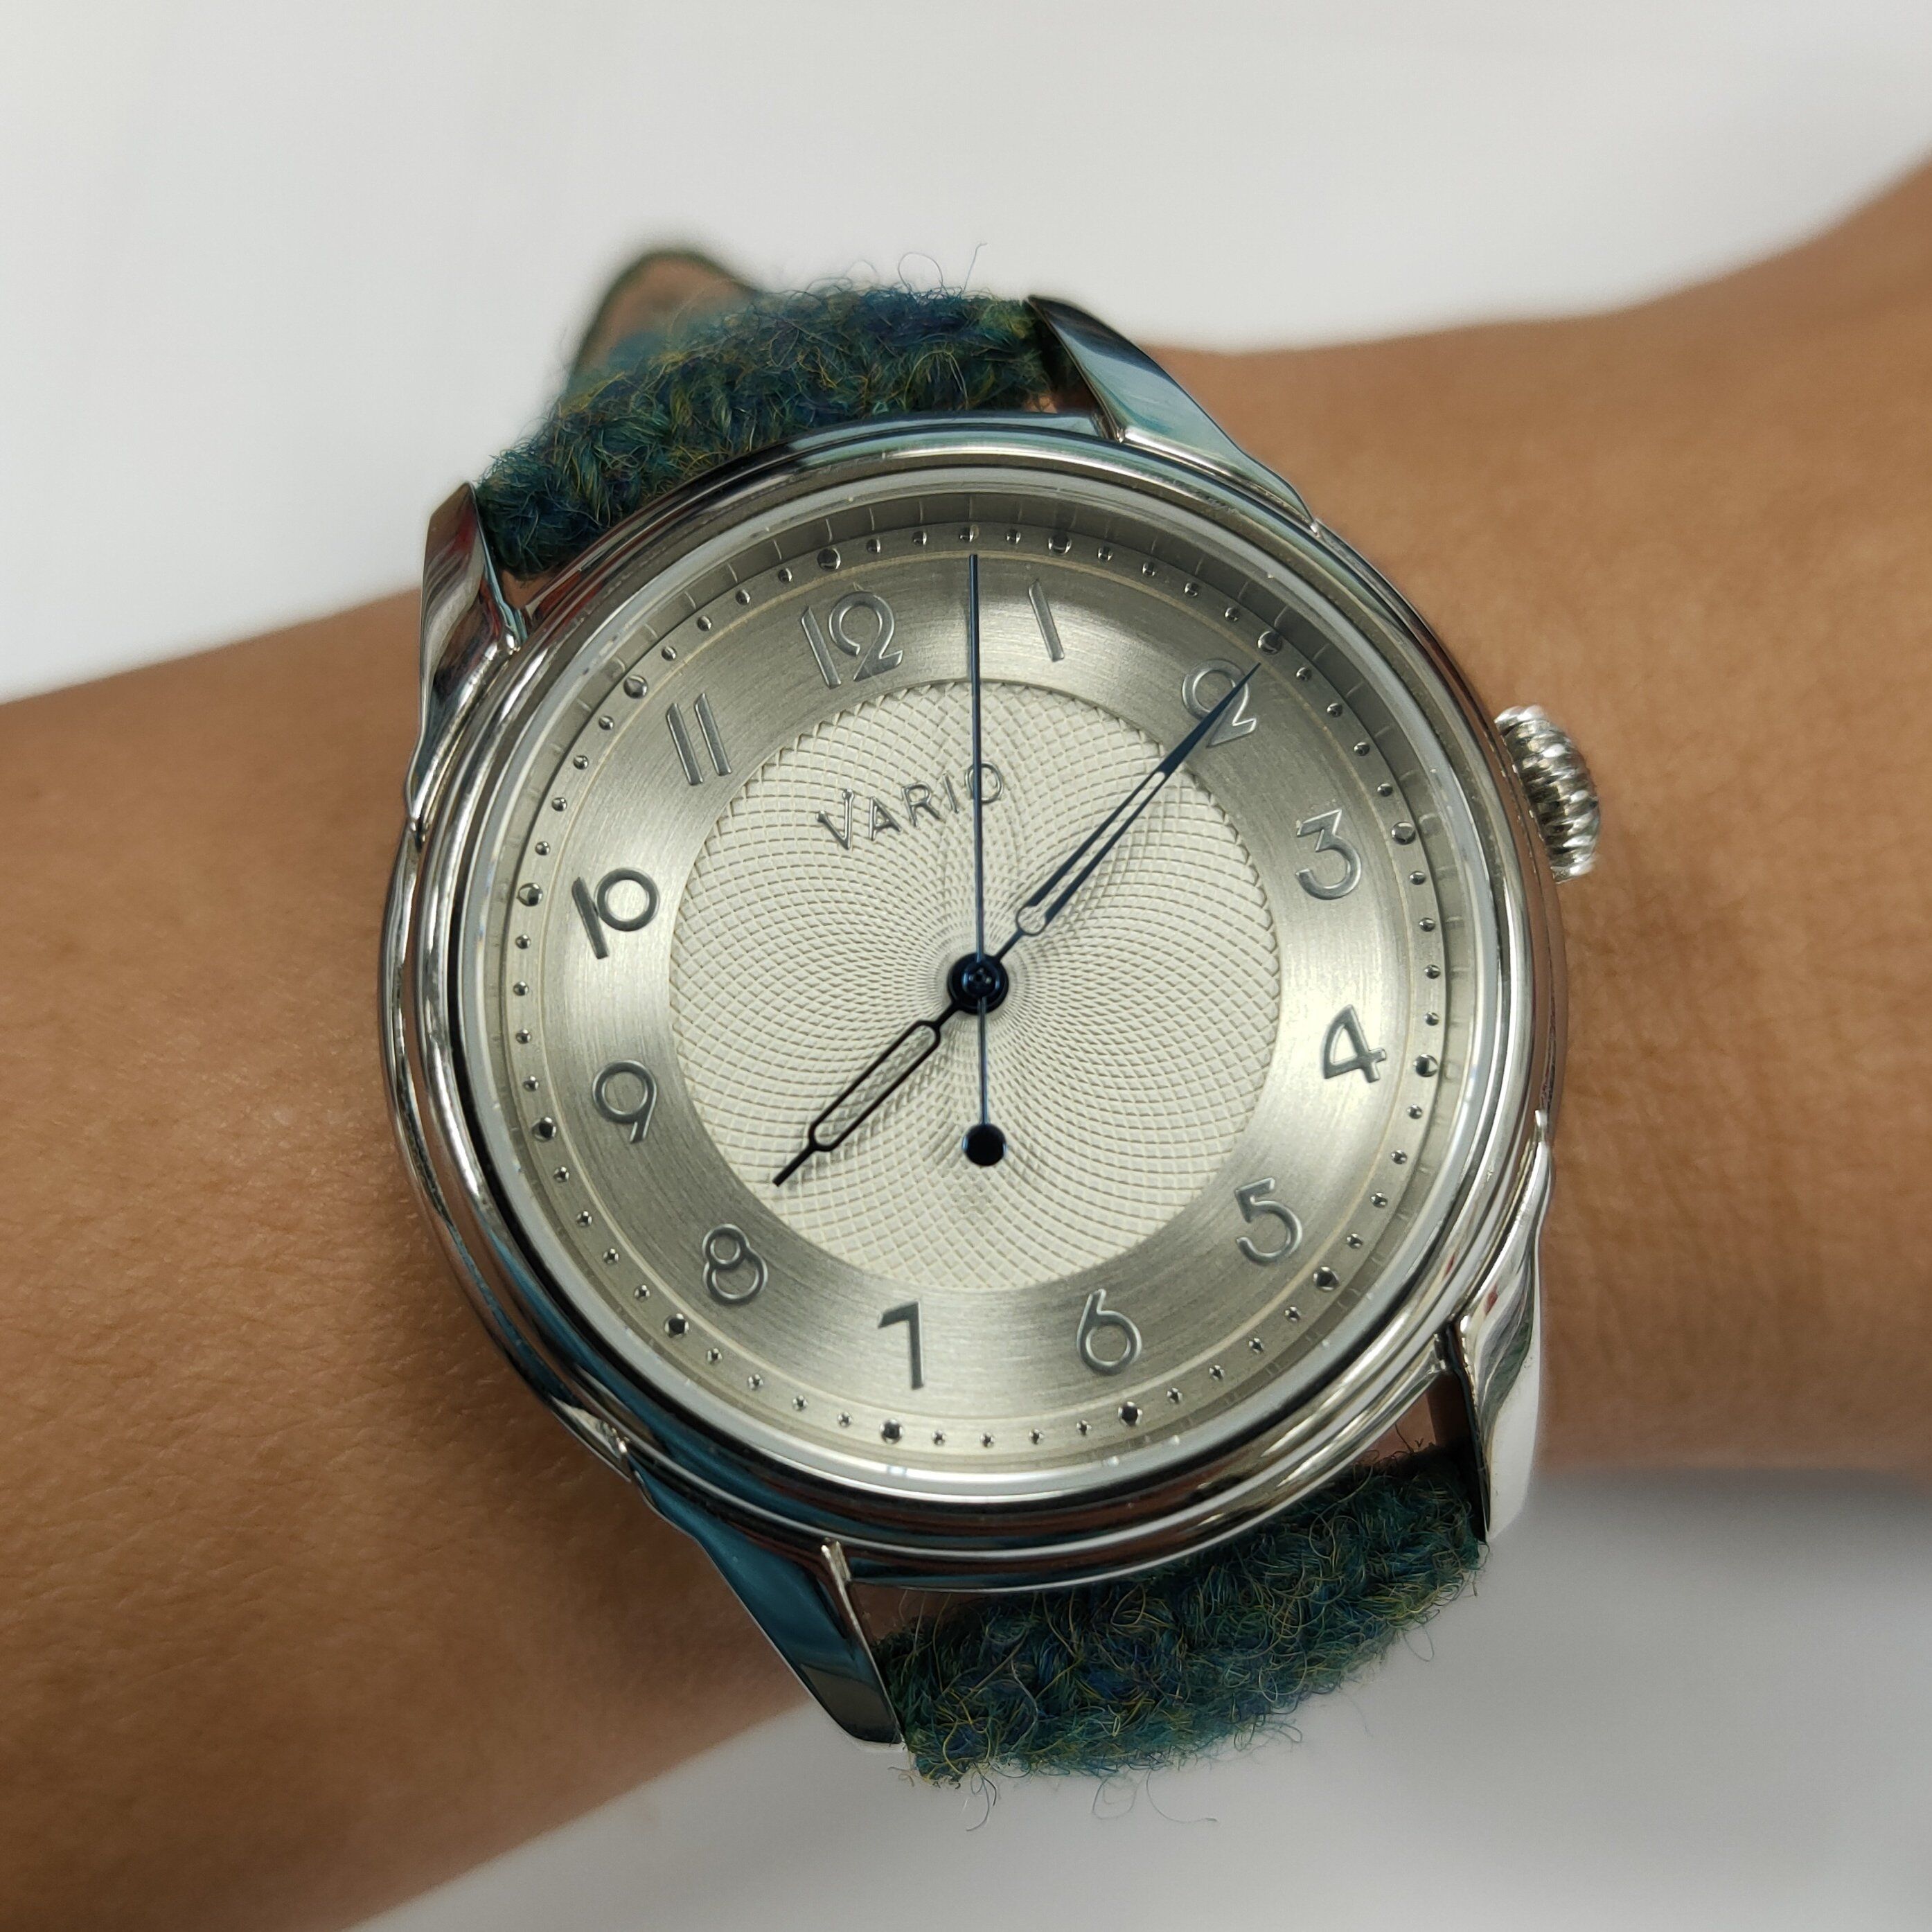 Love Art Deco watch? Check out Vario Empire Silver! Photo by happy customer #varioeveryday member SK